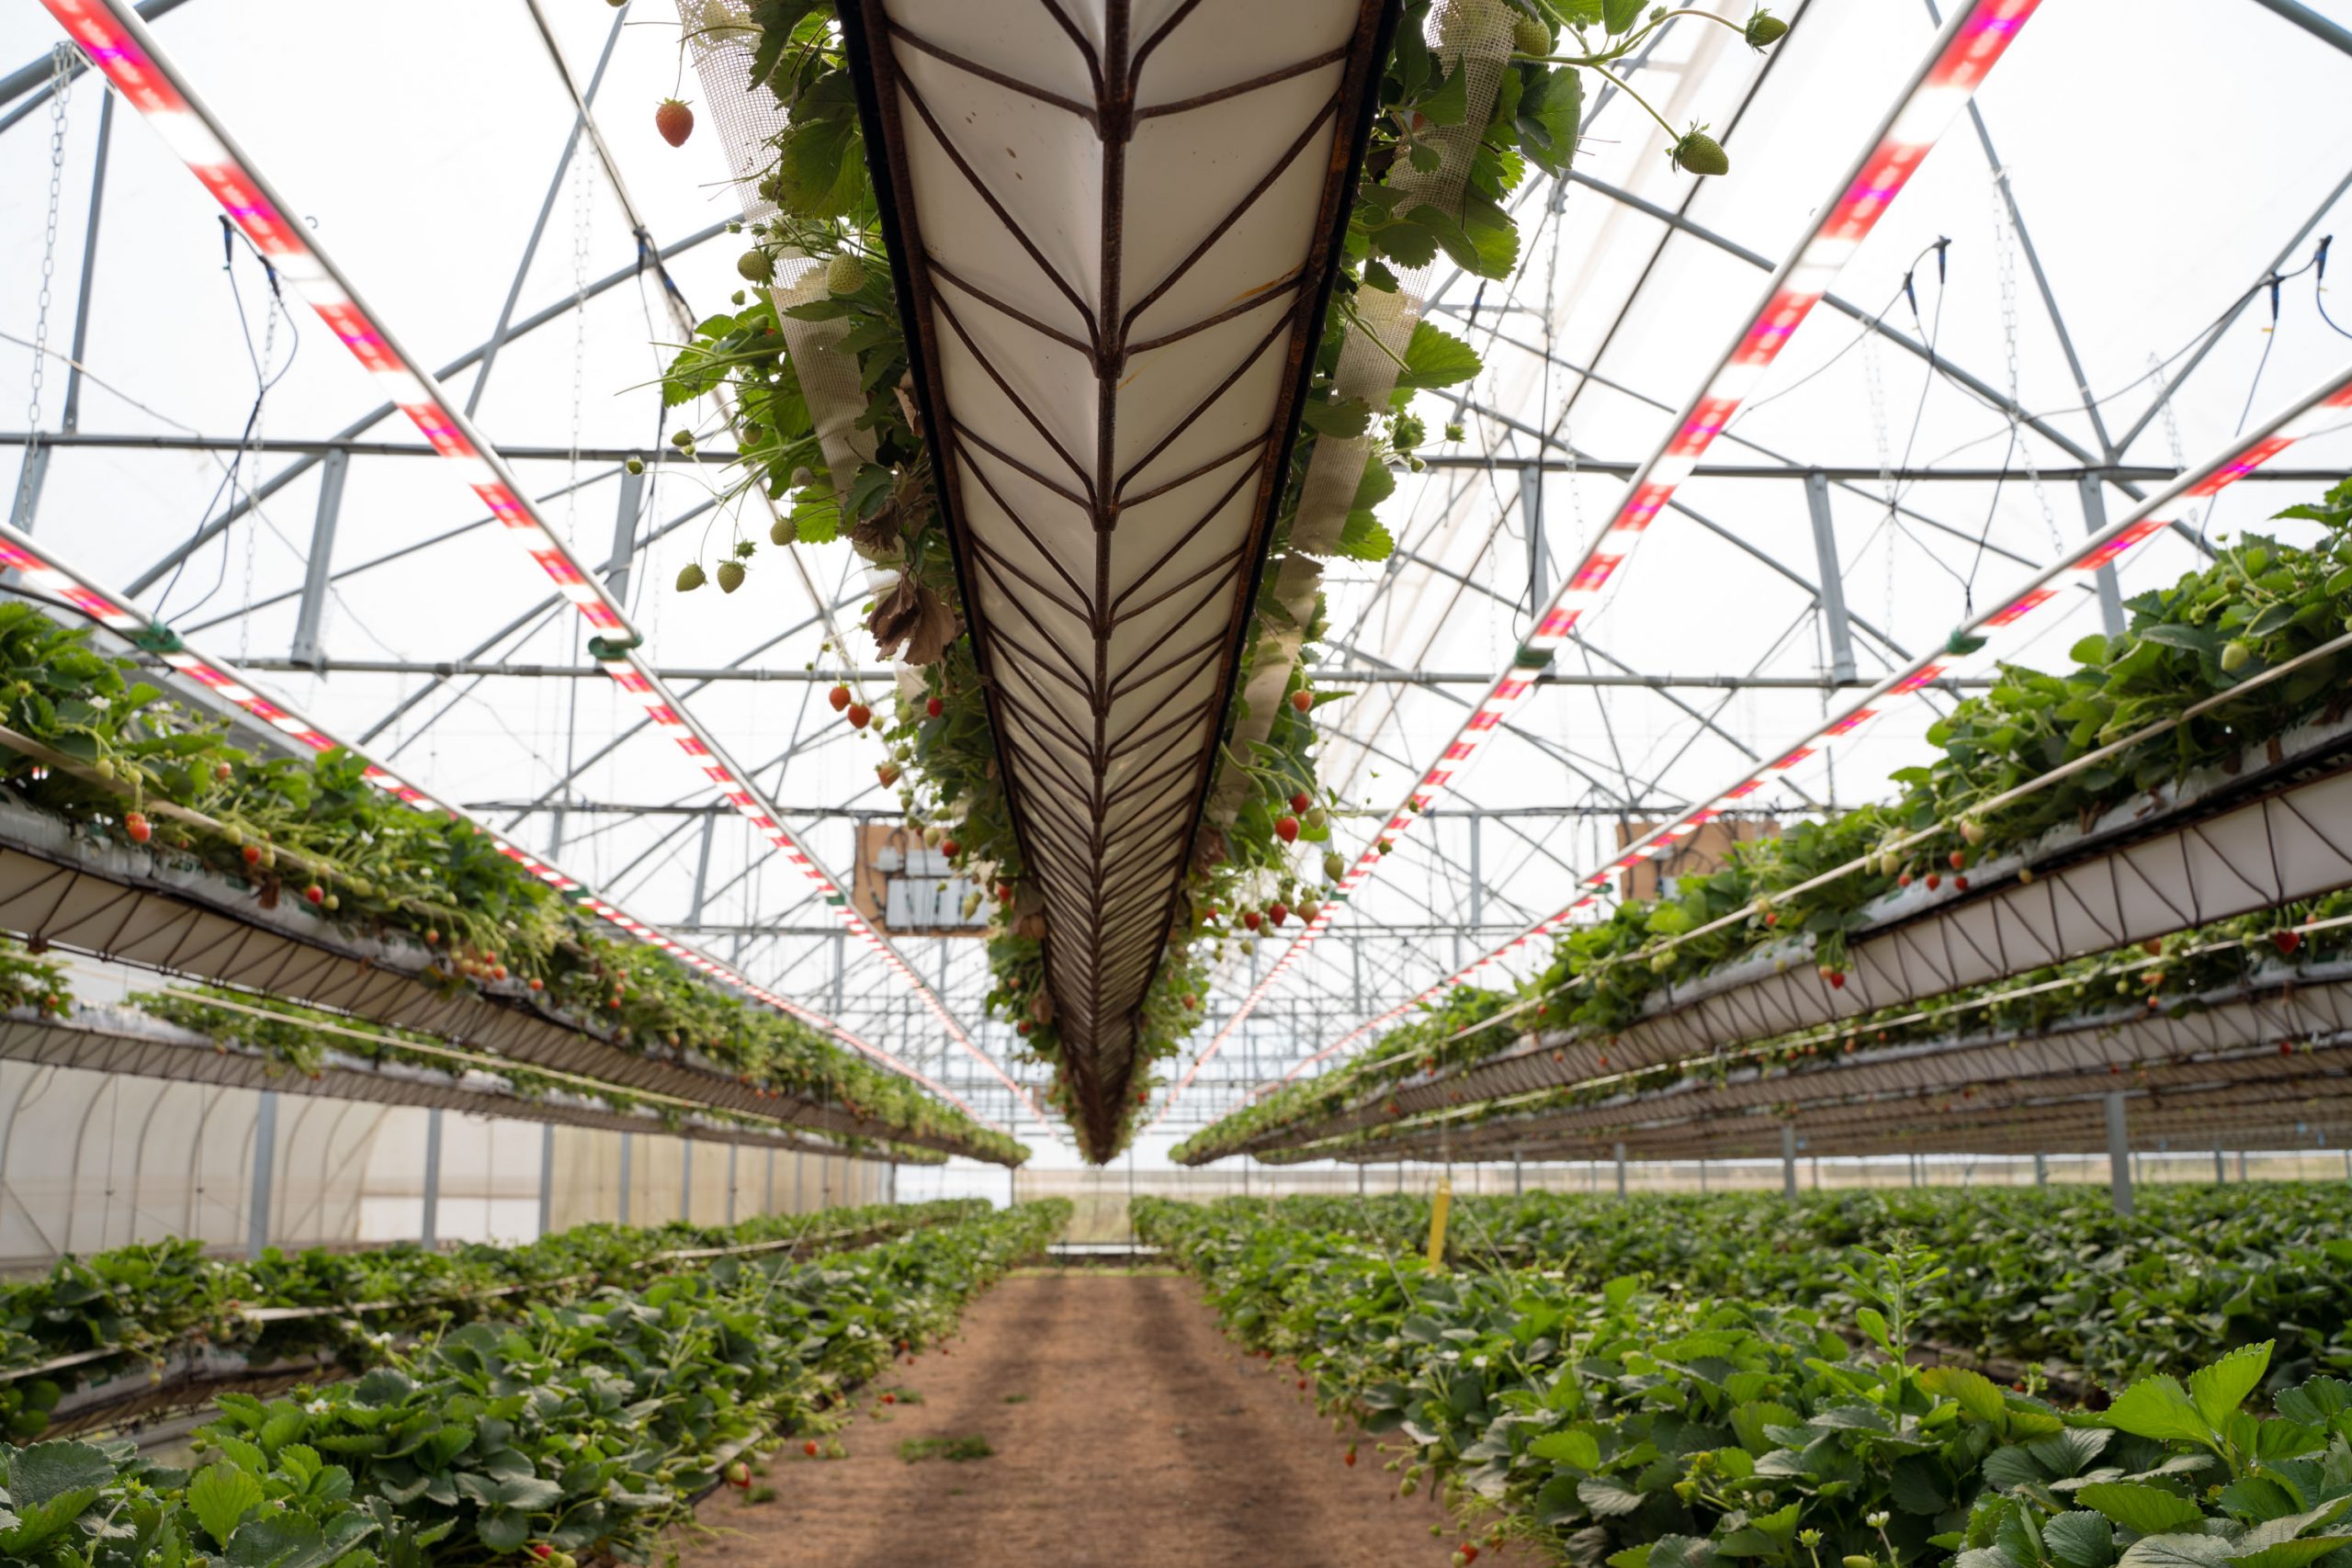 Light Science Technologies to share CEA expertise at Indoor AgTech Innovation Summit